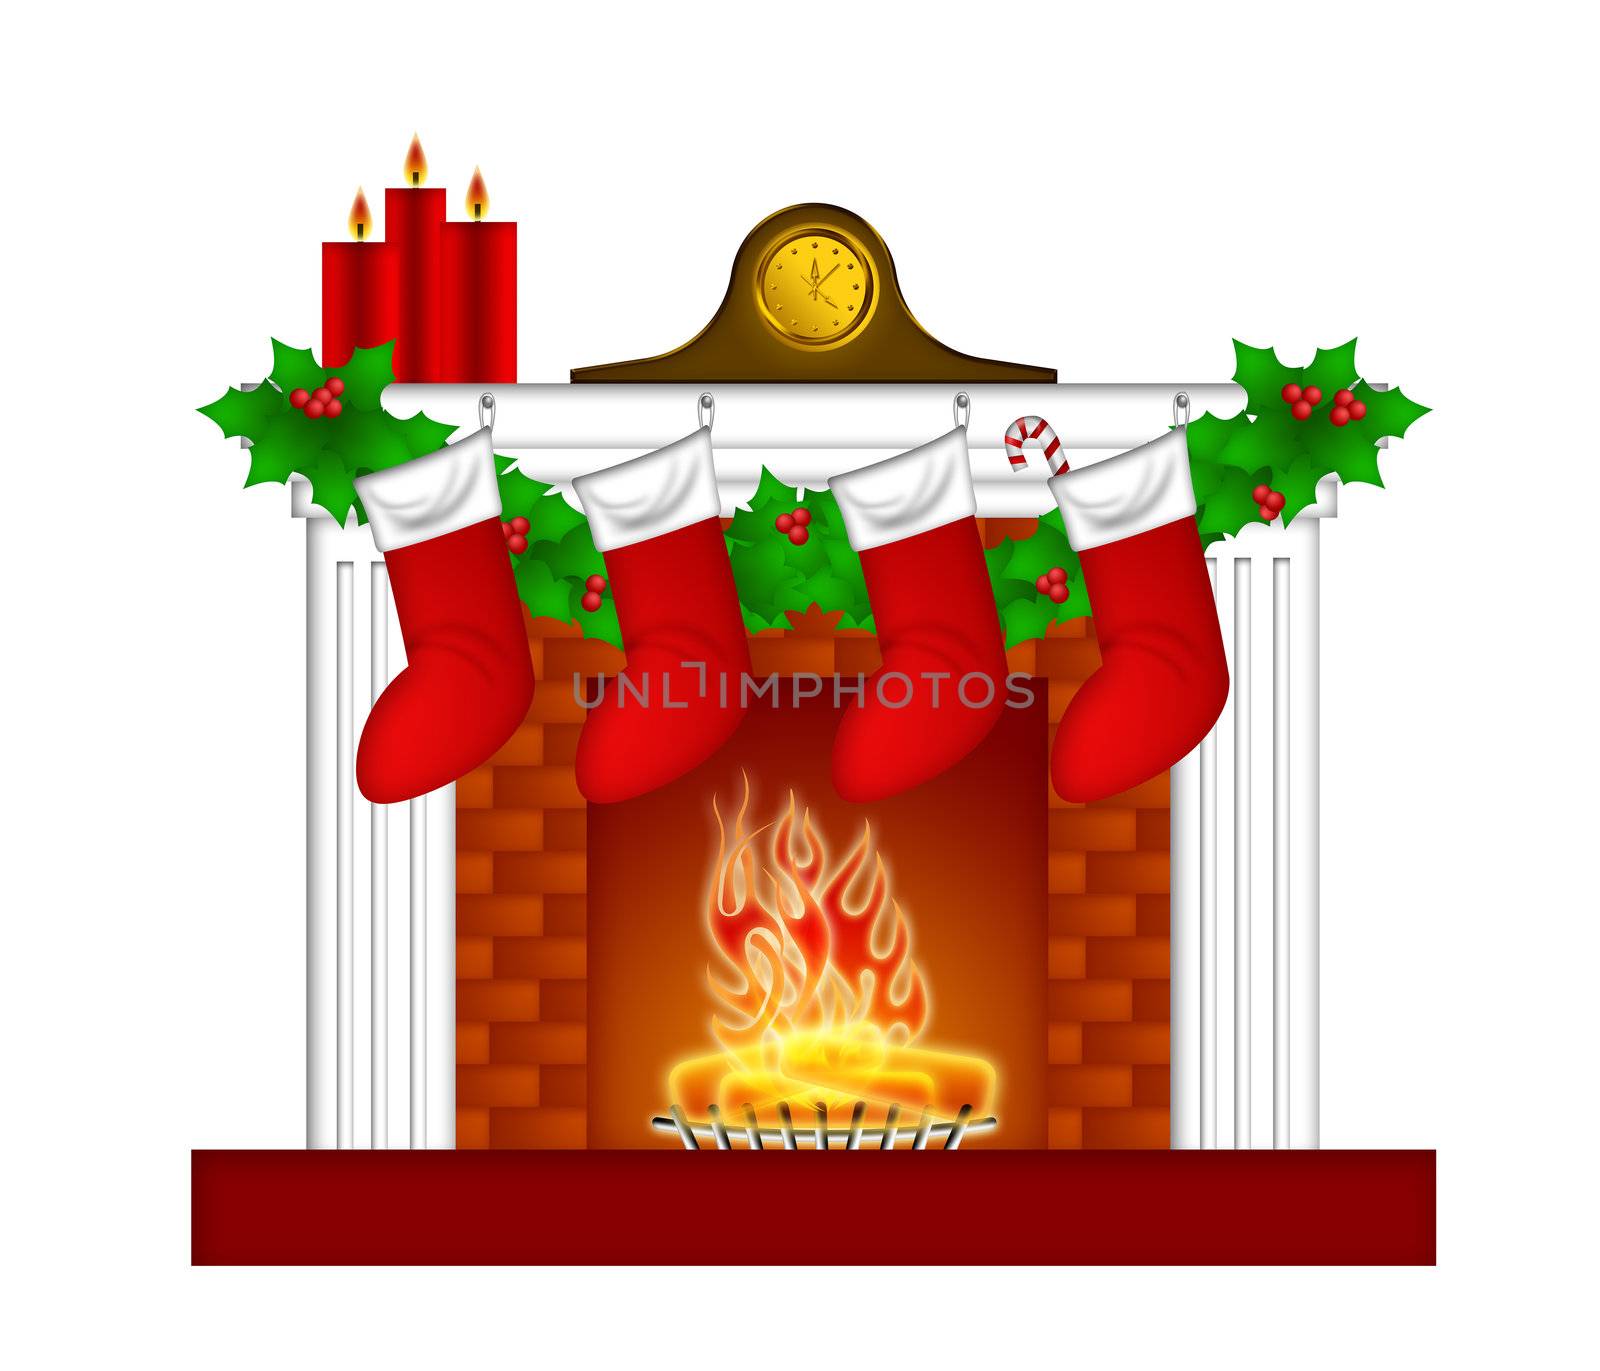 Fireplace Christmas Decoration wth Stockings and Garland by jpldesigns